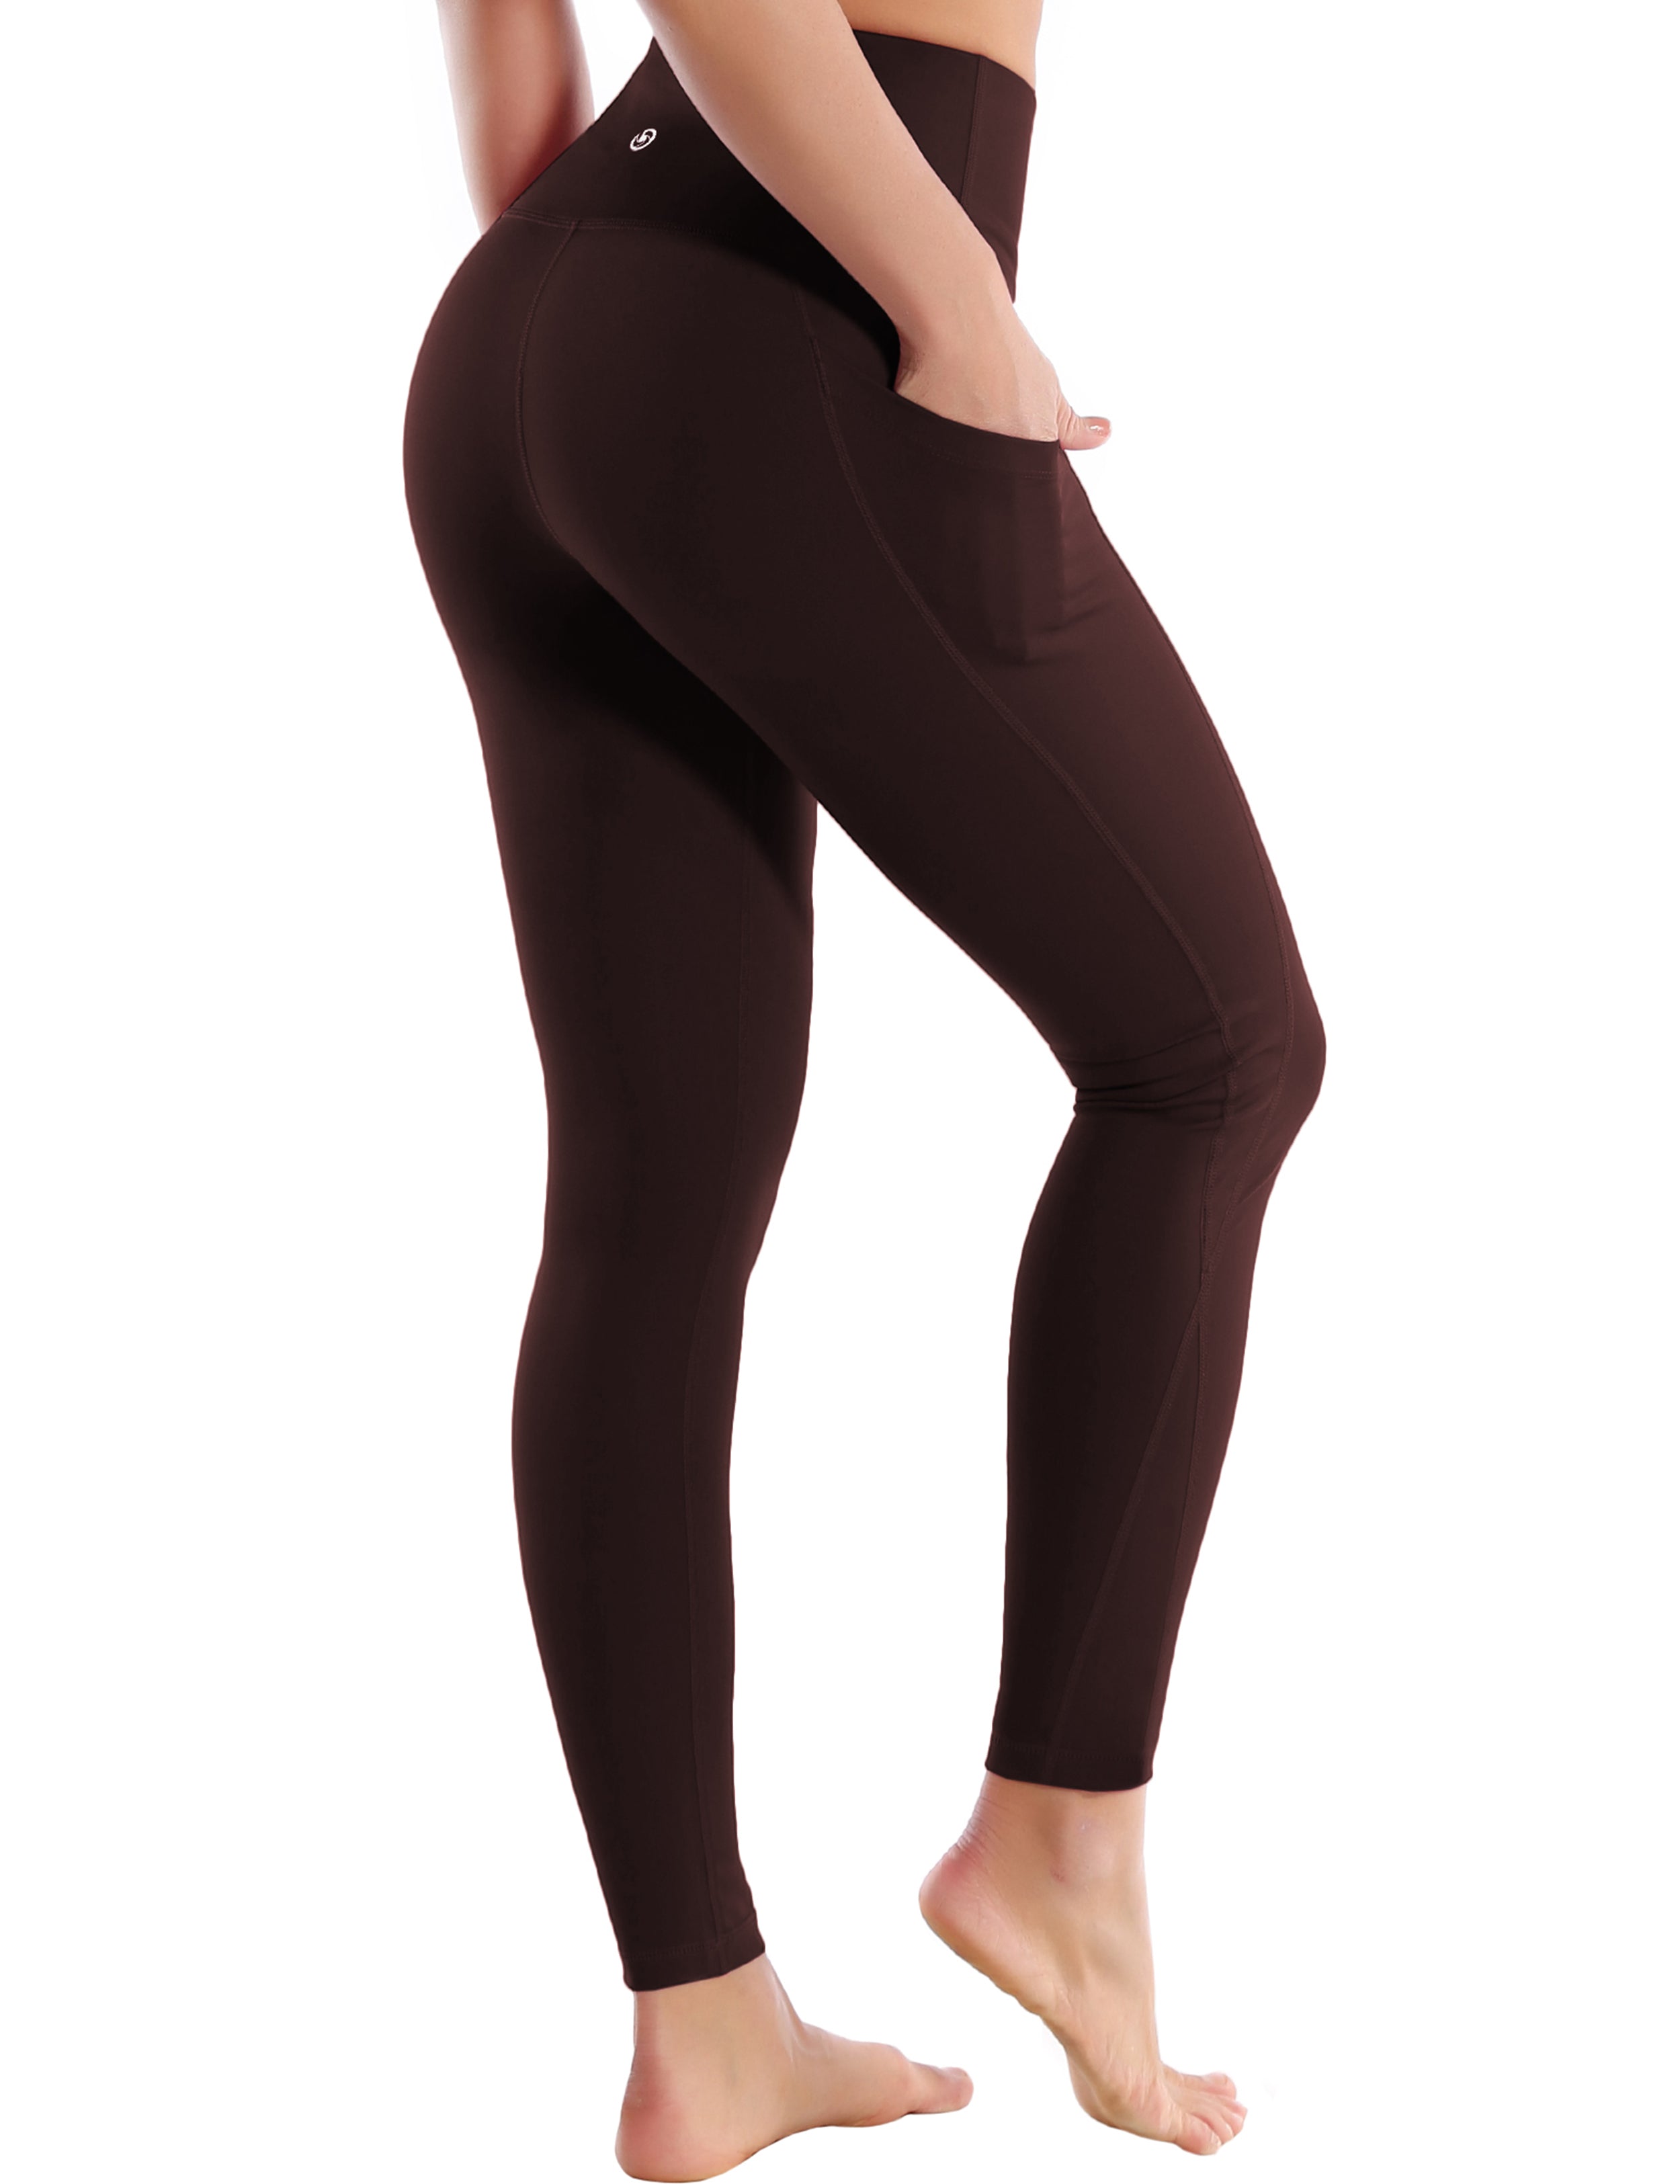 High Waist Side Pockets Tall Size Pants mahoganymaroon 75% Nylon, 25% Spandex Fabric doesn't attract lint easily 4-way stretch No see-through Moisture-wicking Tummy control Inner pocket